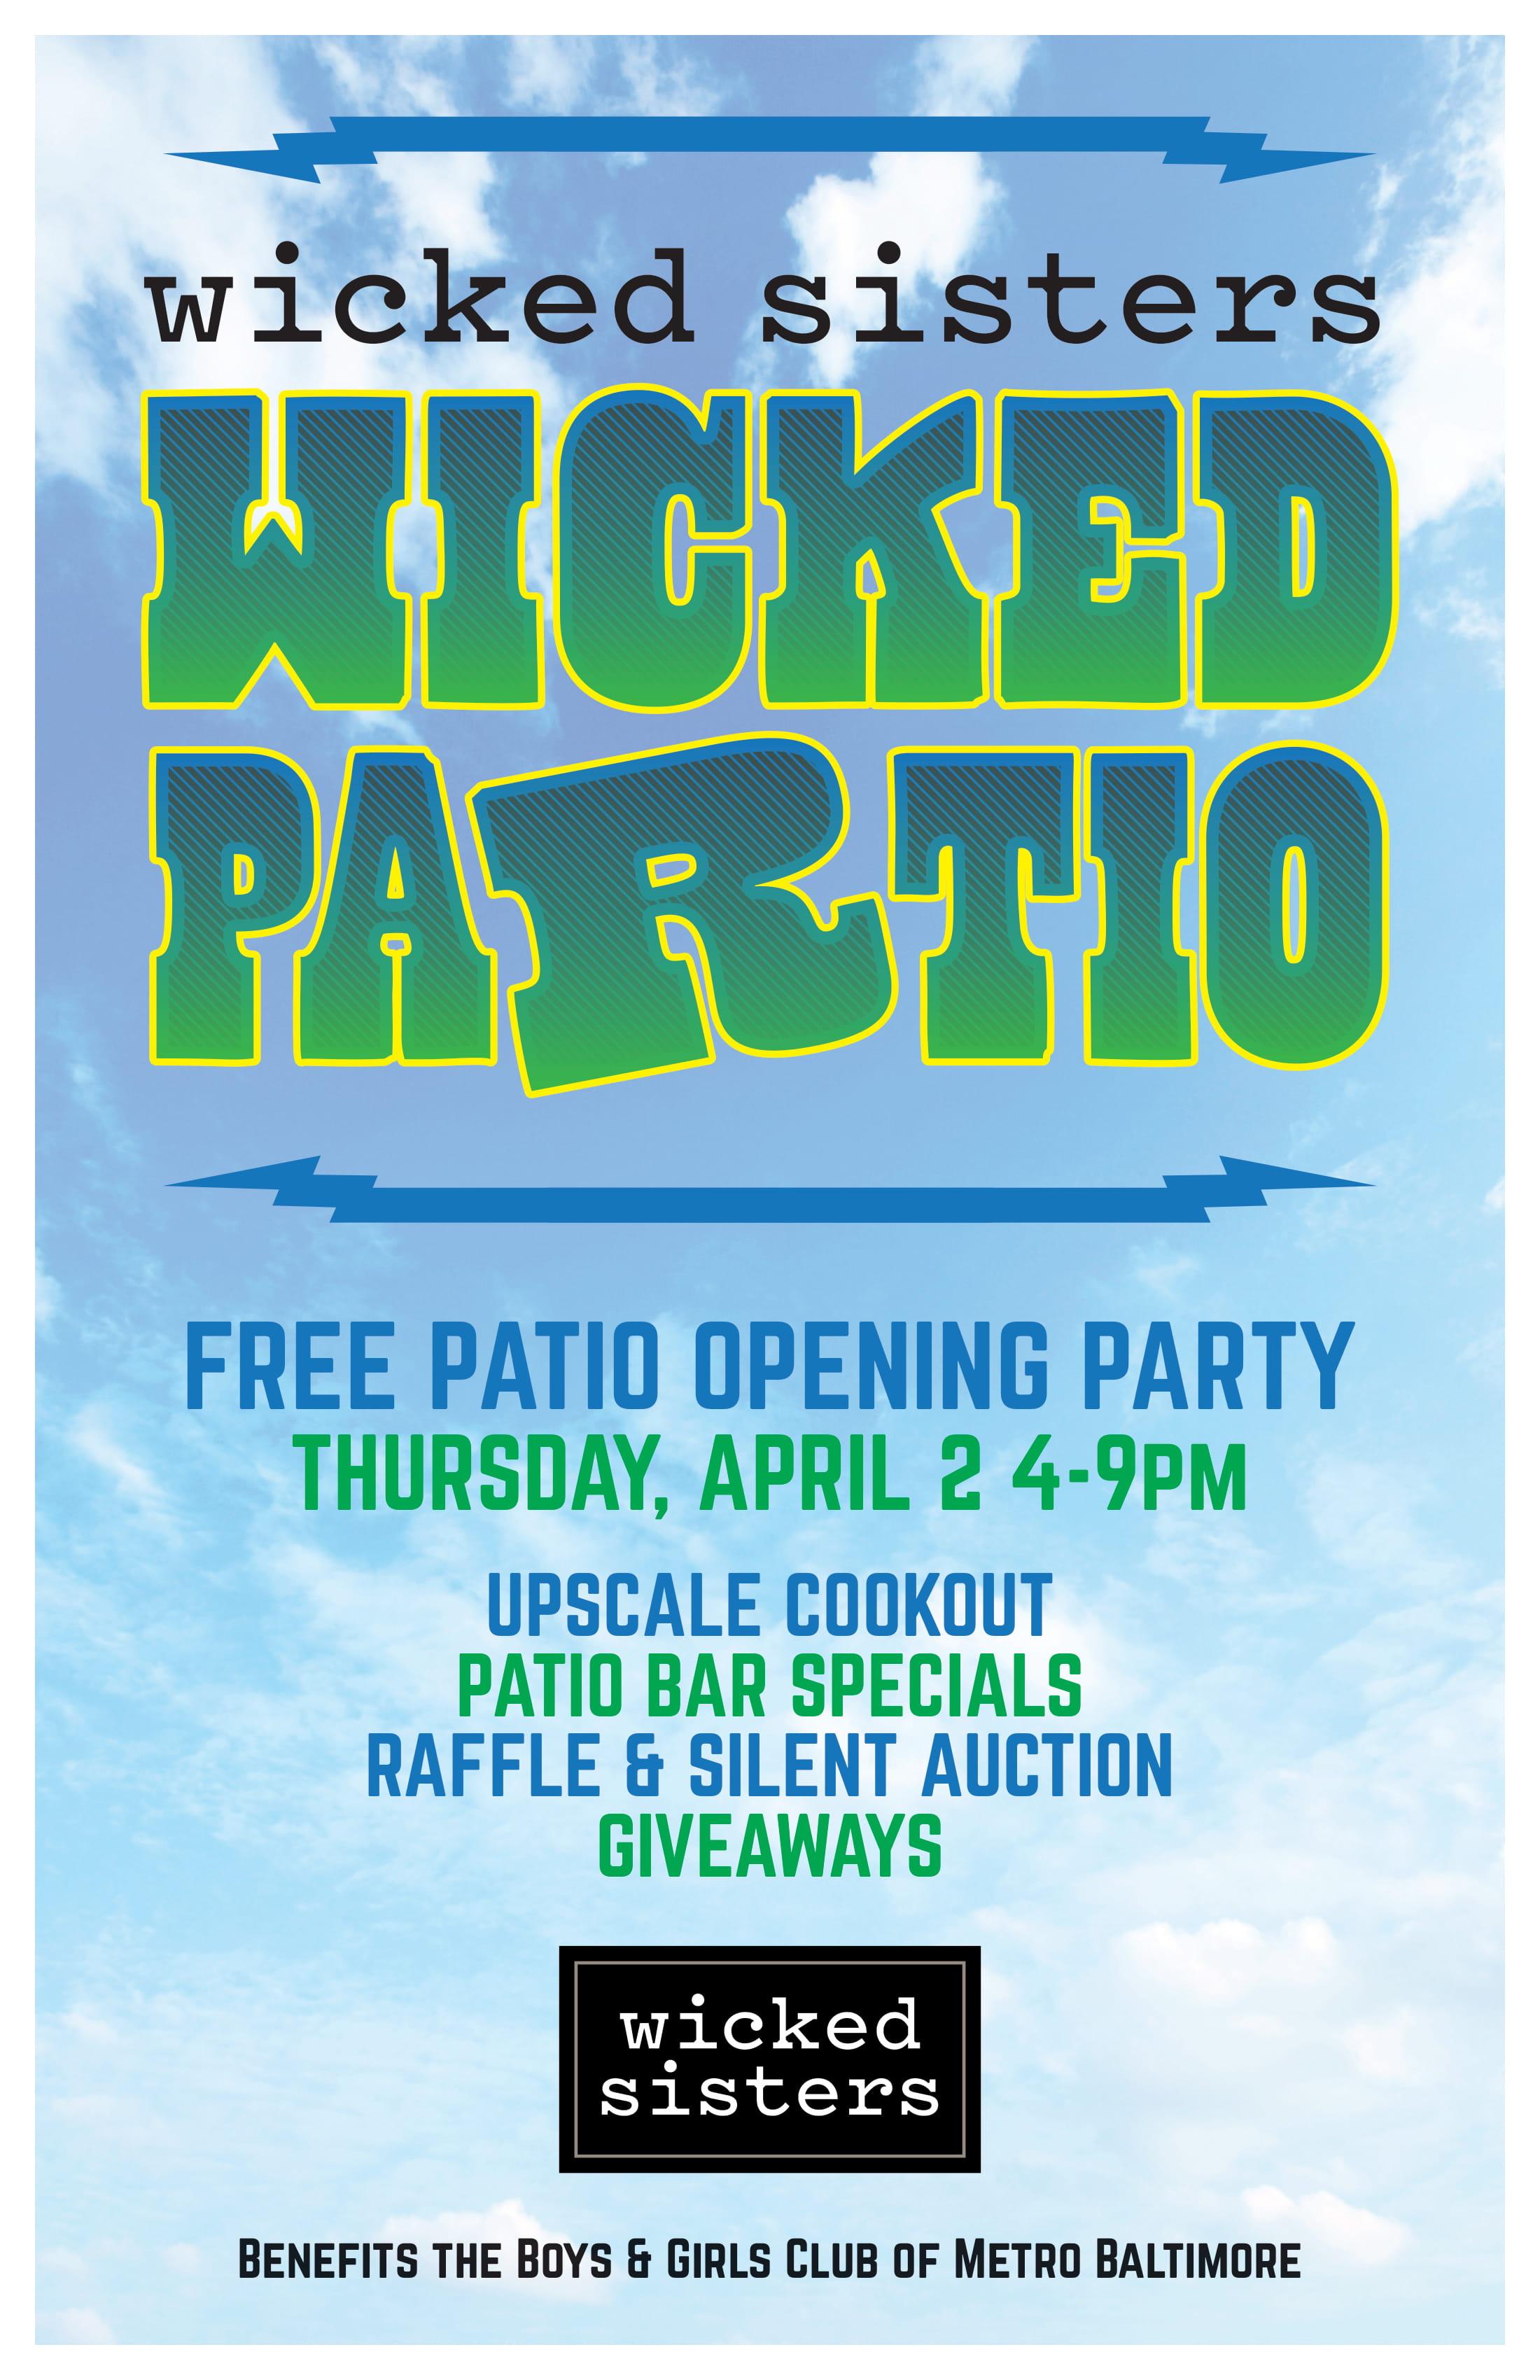 PATIO OPENING PARTY AT WICKED SISTERS